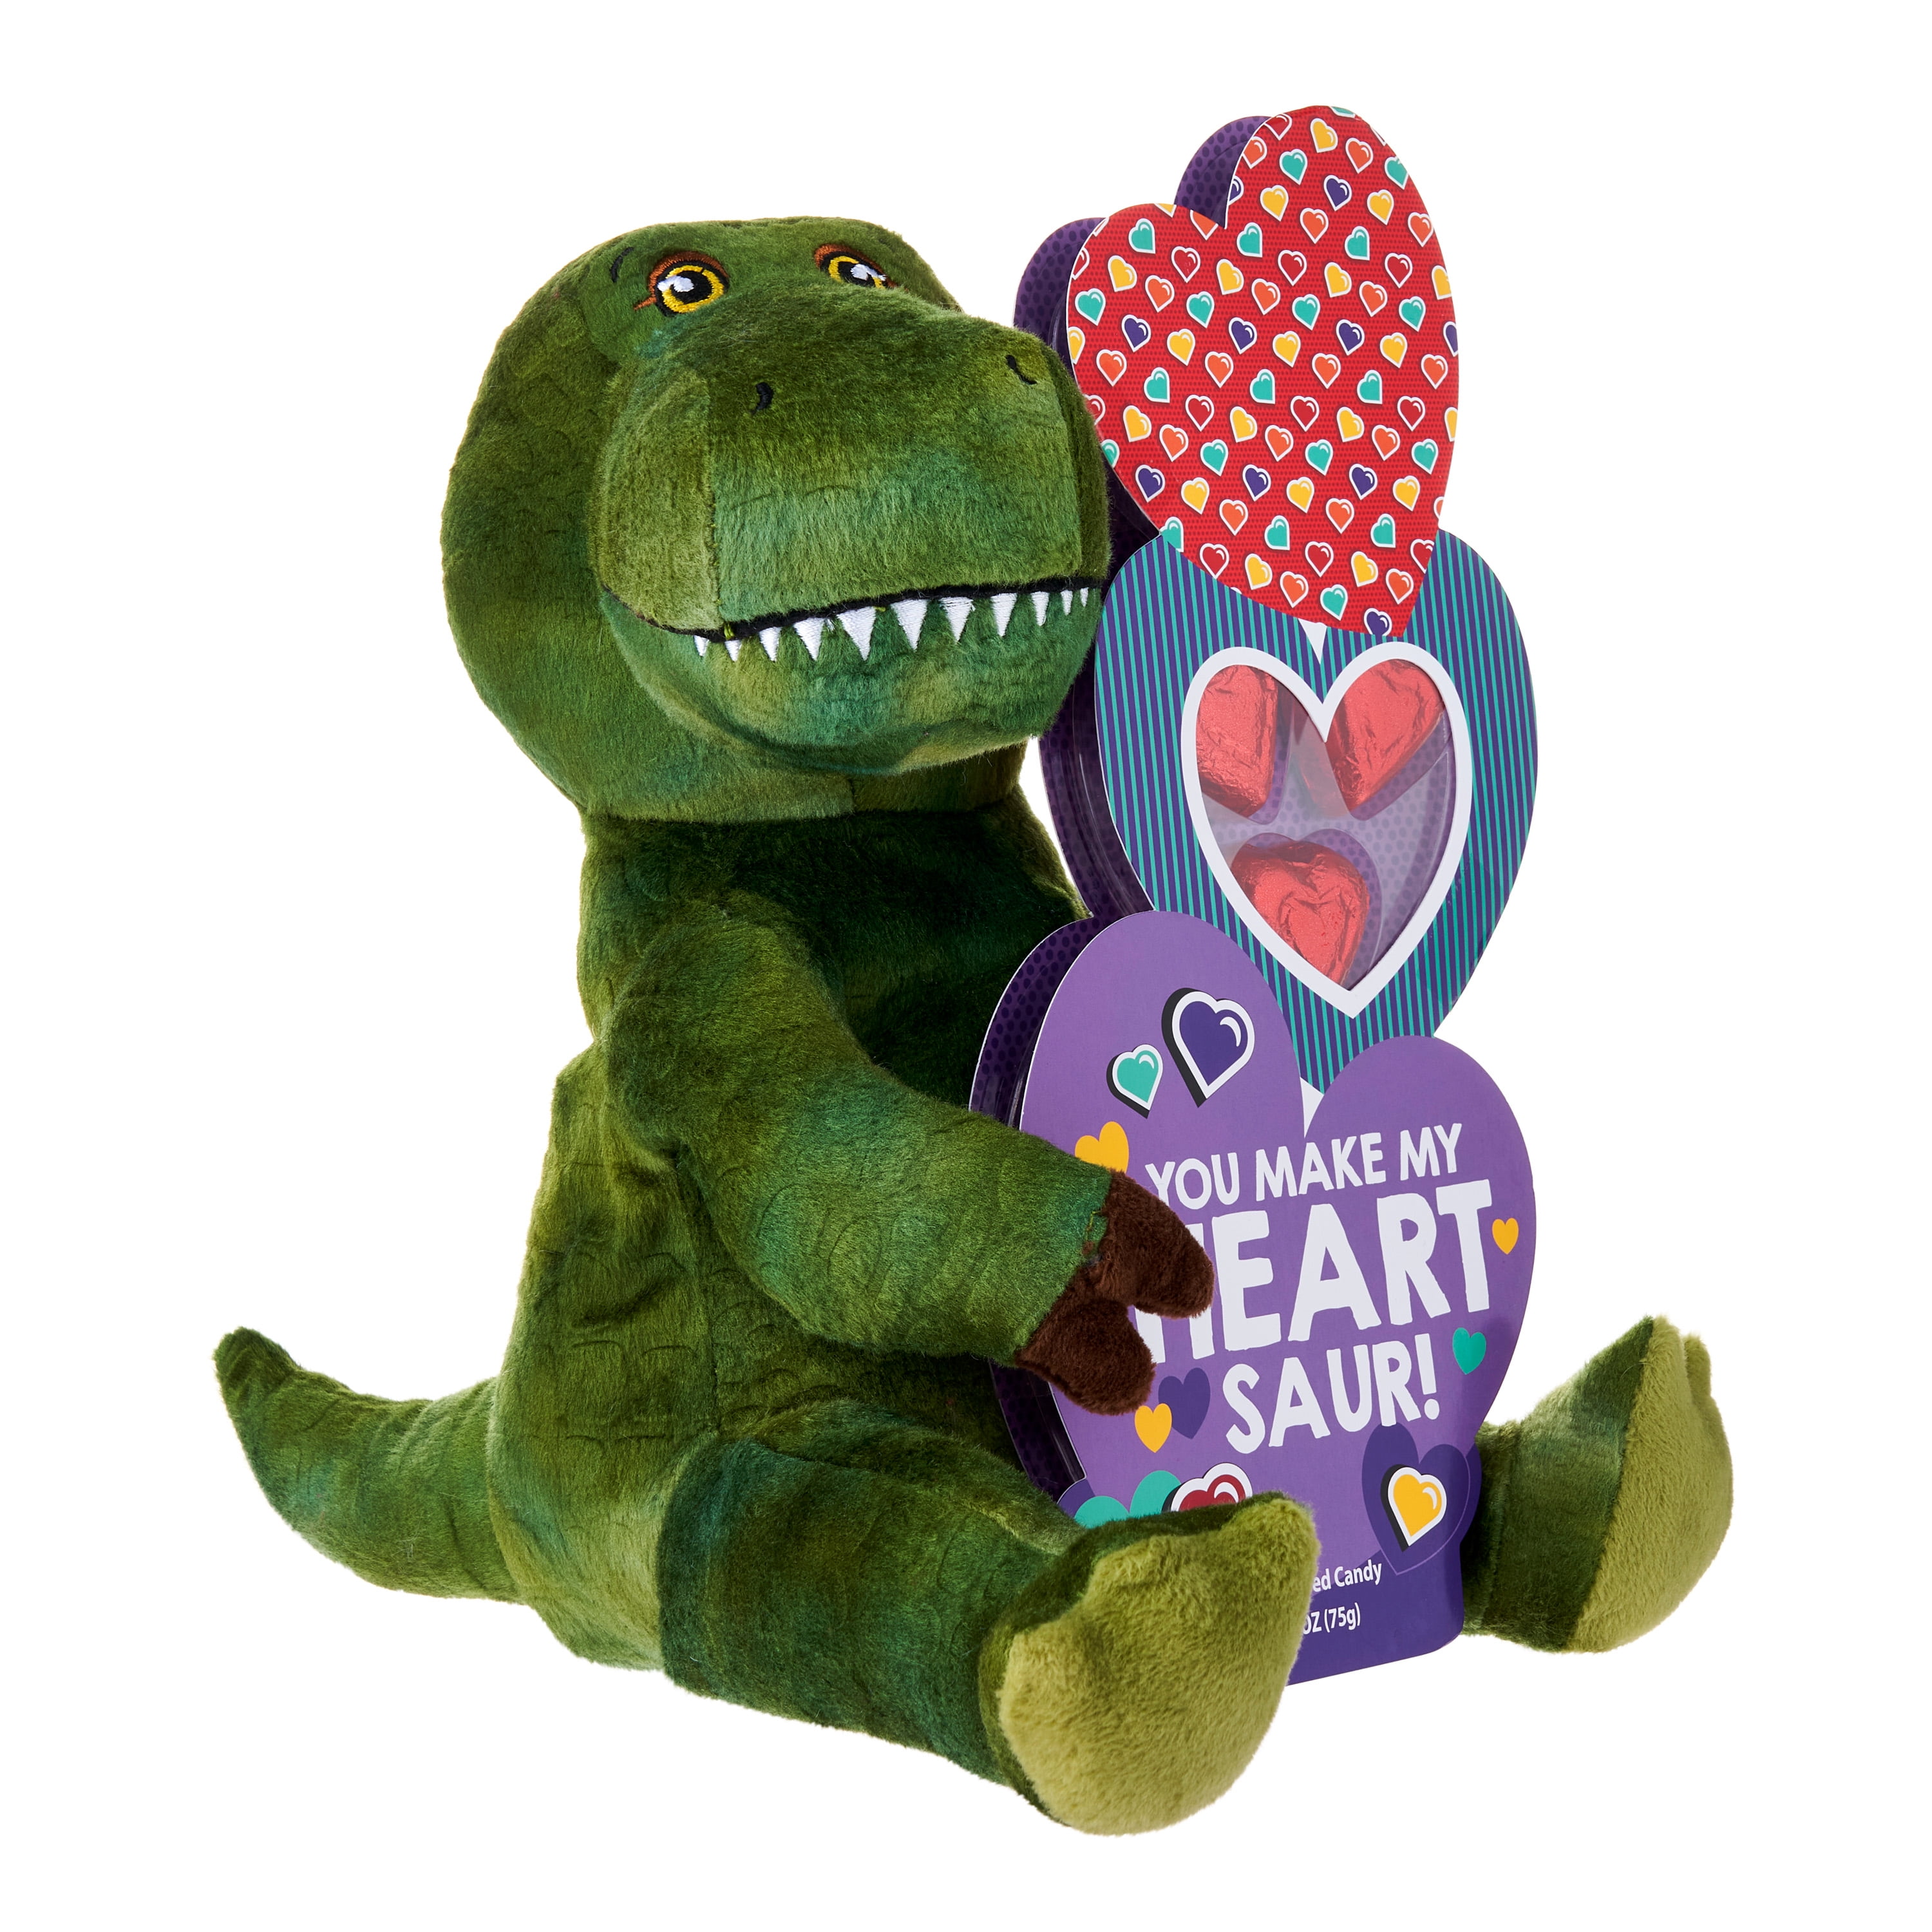 Way to Celebrate!  Progressive Gifts 9.5" Valentine's Day Plush Dinosaur and Candy Gift Set